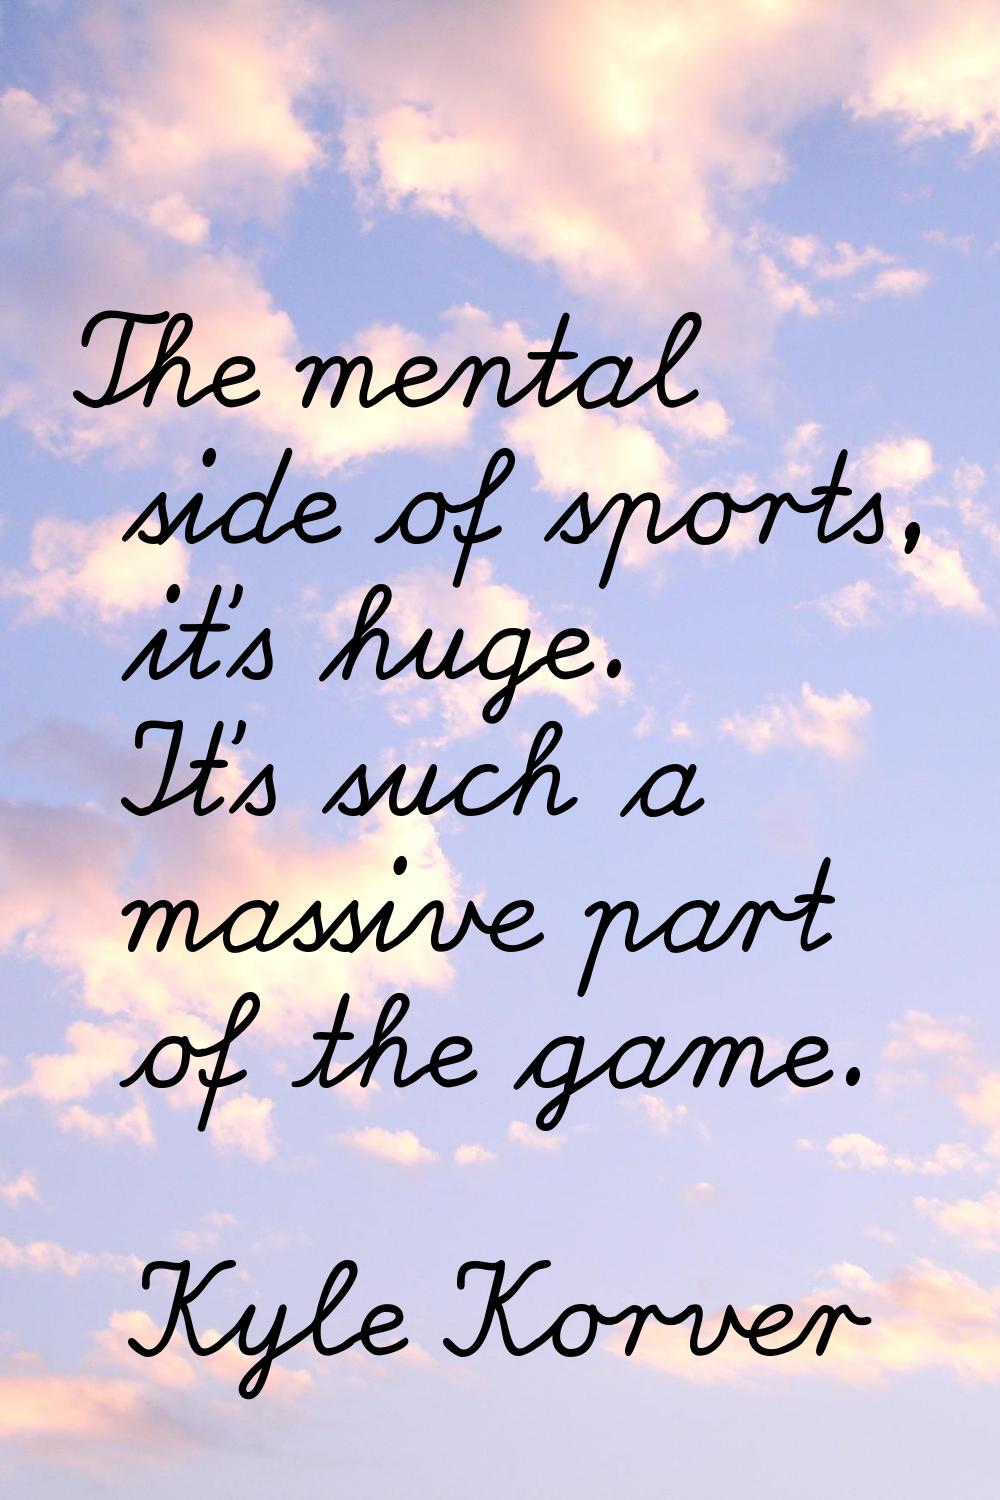 The mental side of sports, it's huge. It's such a massive part of the game.